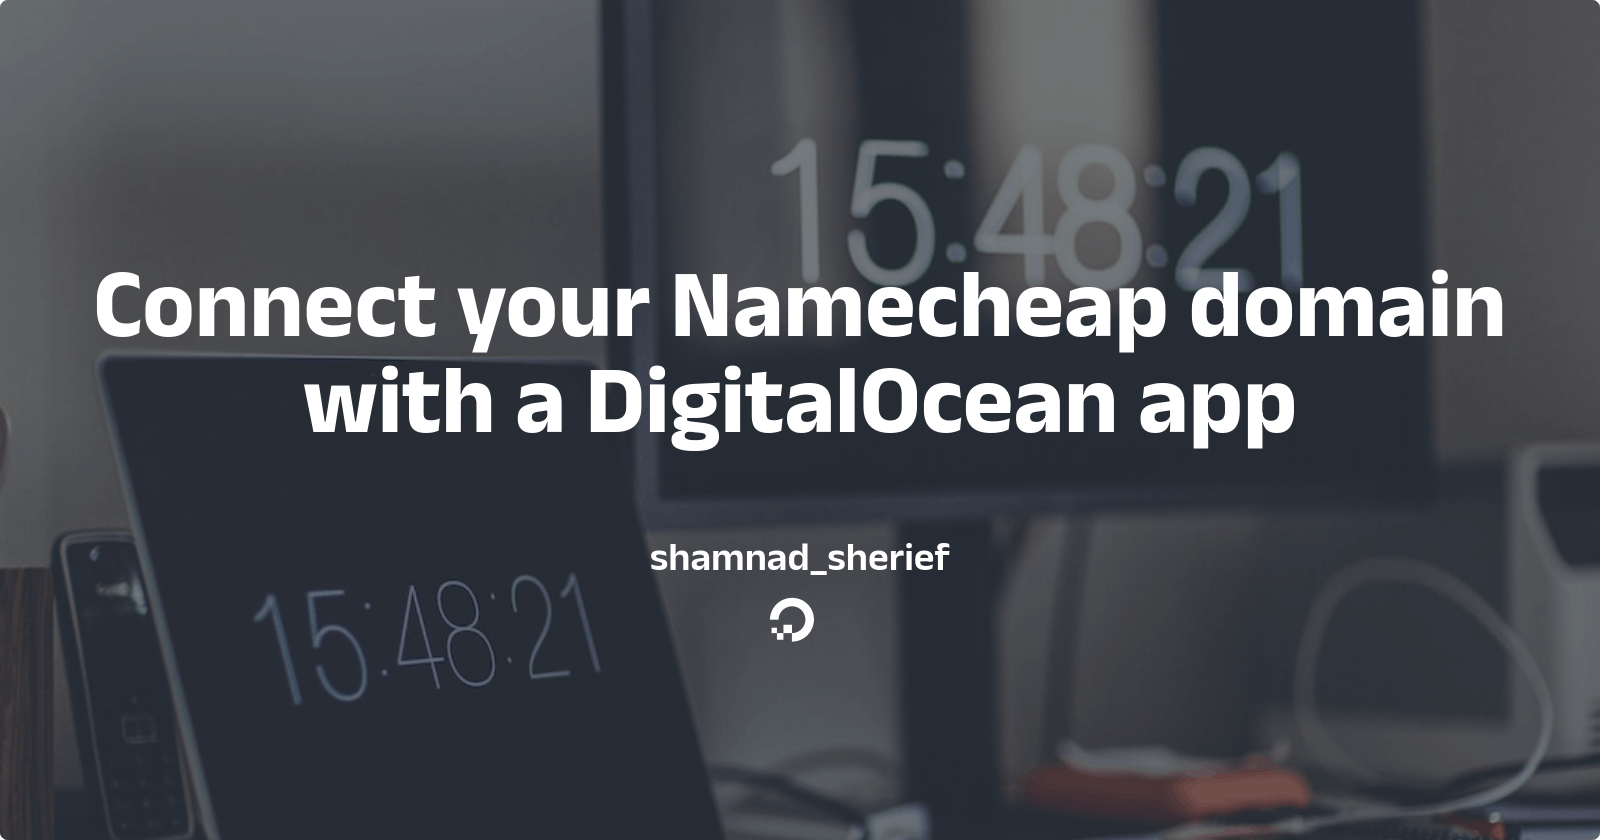 How to connect your Namecheap domain with a DigitalOcean app